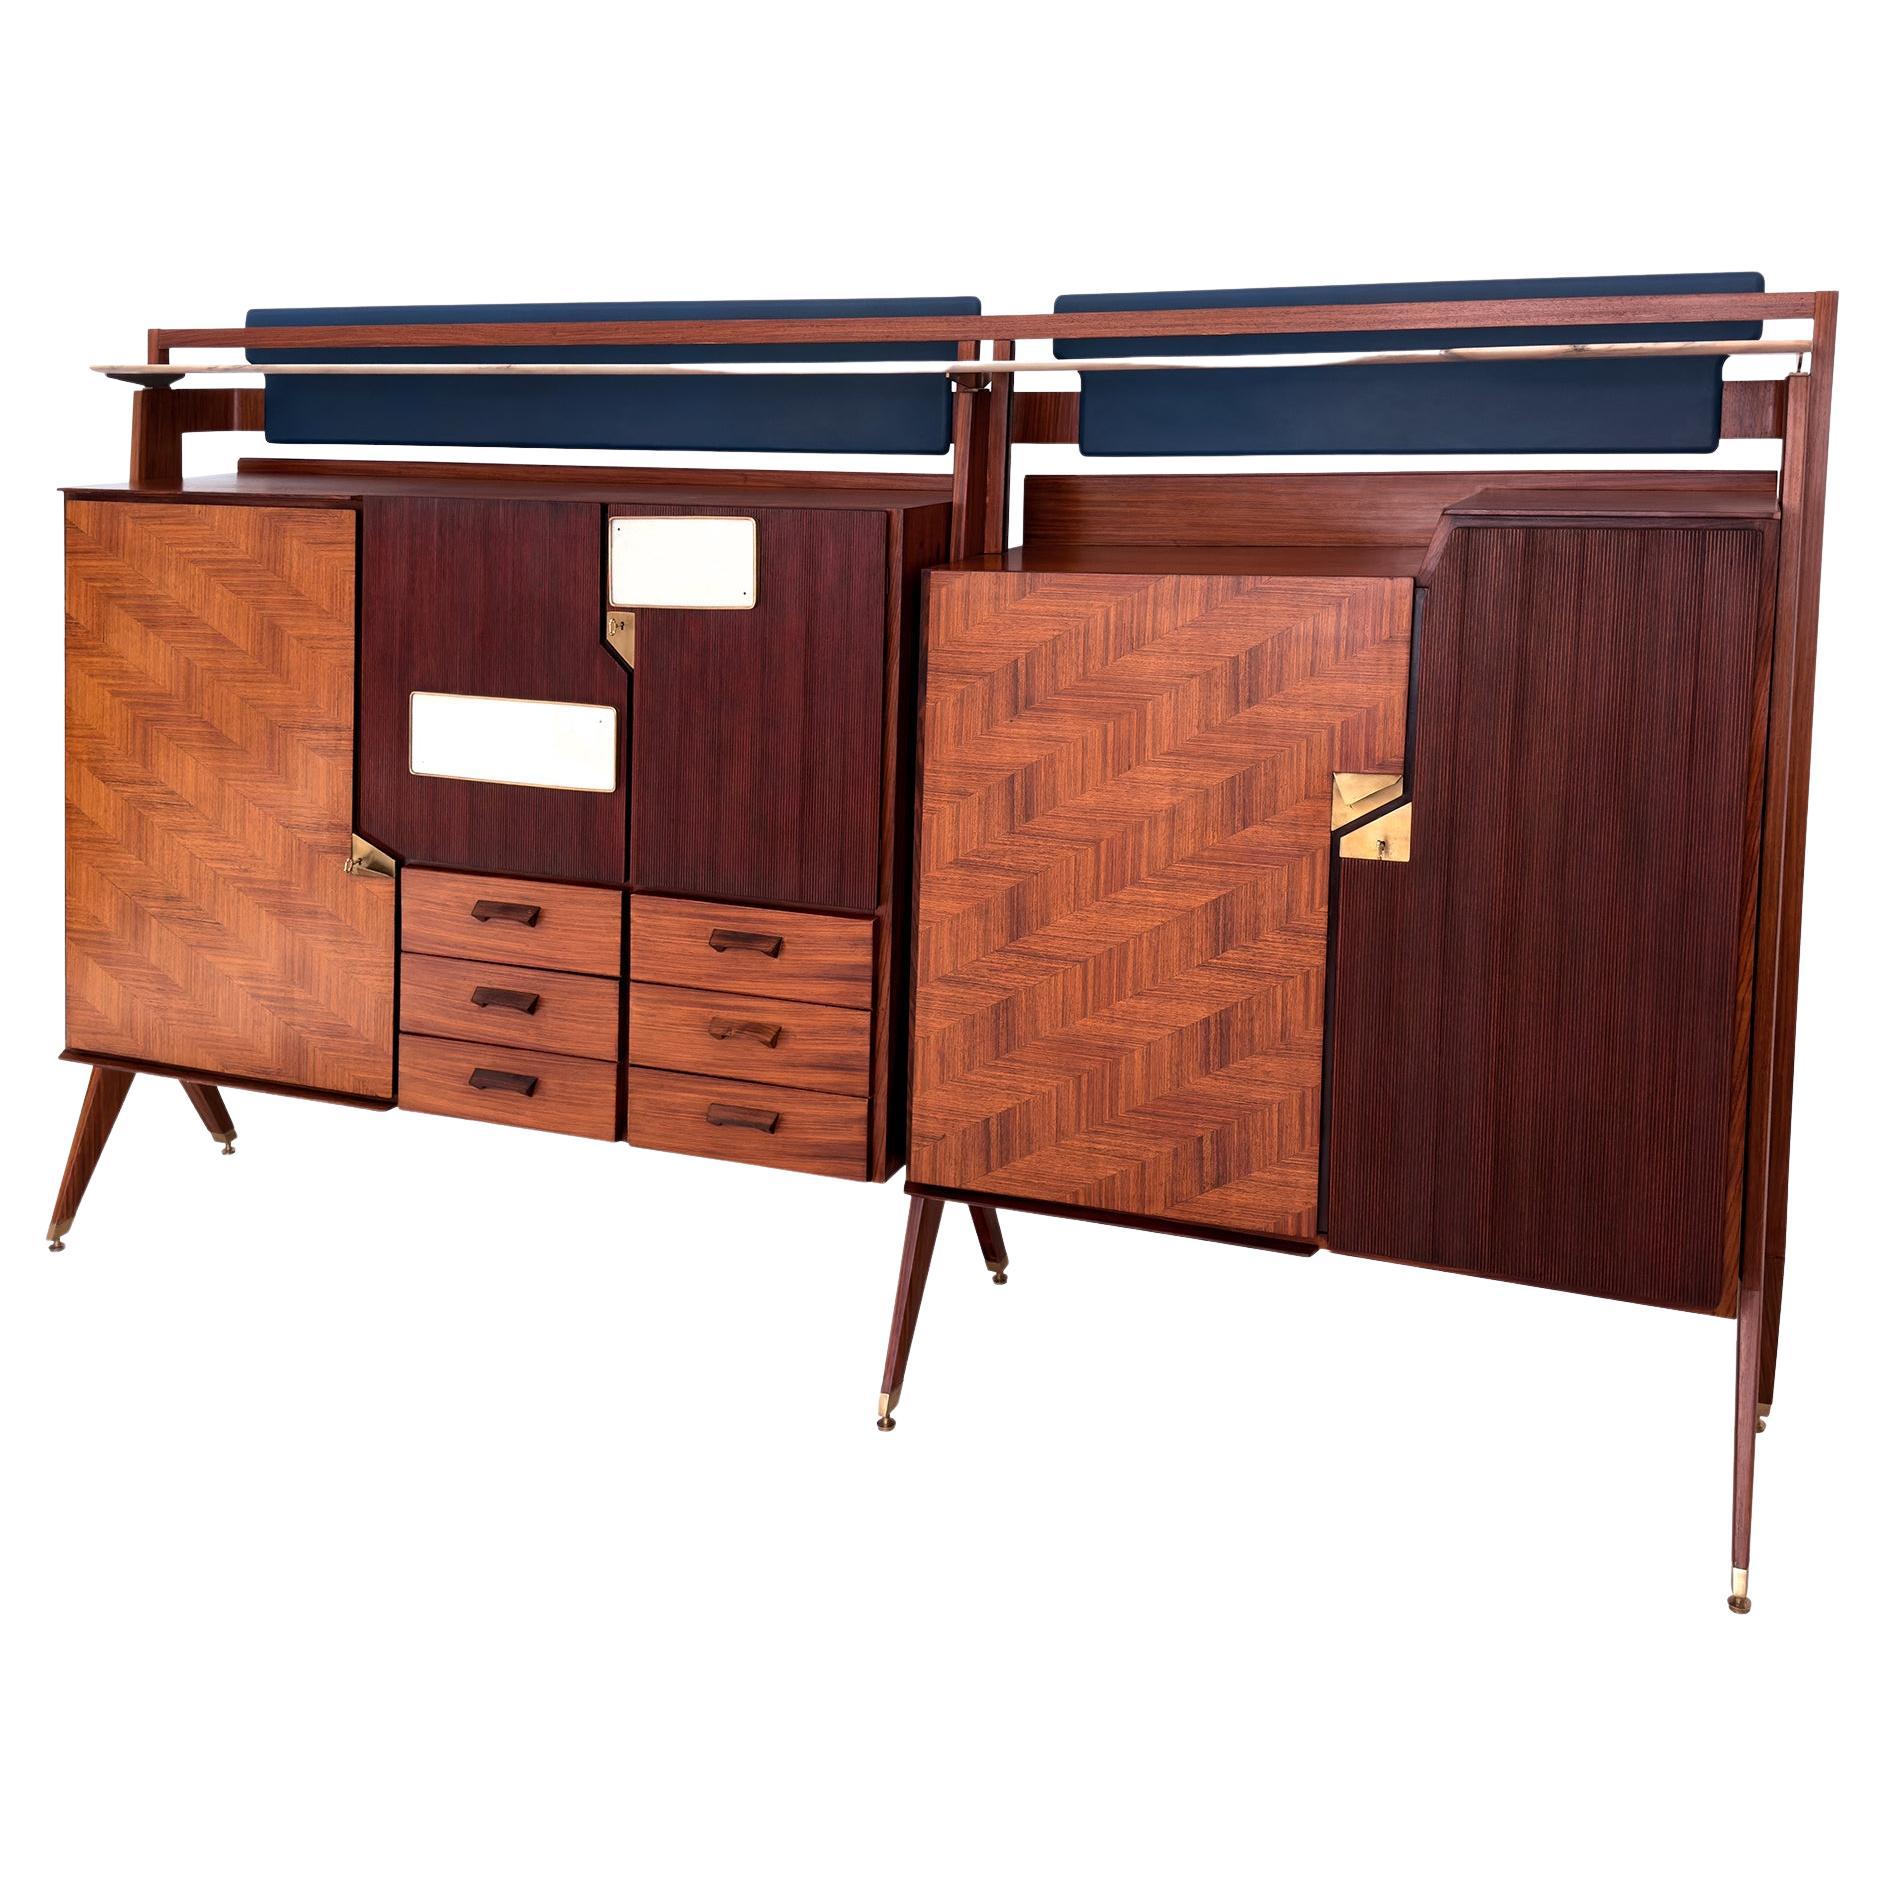 Italian Midcentury Sideboard or Bar Cabinet by La Permanente Mobili Cantù, 1950s